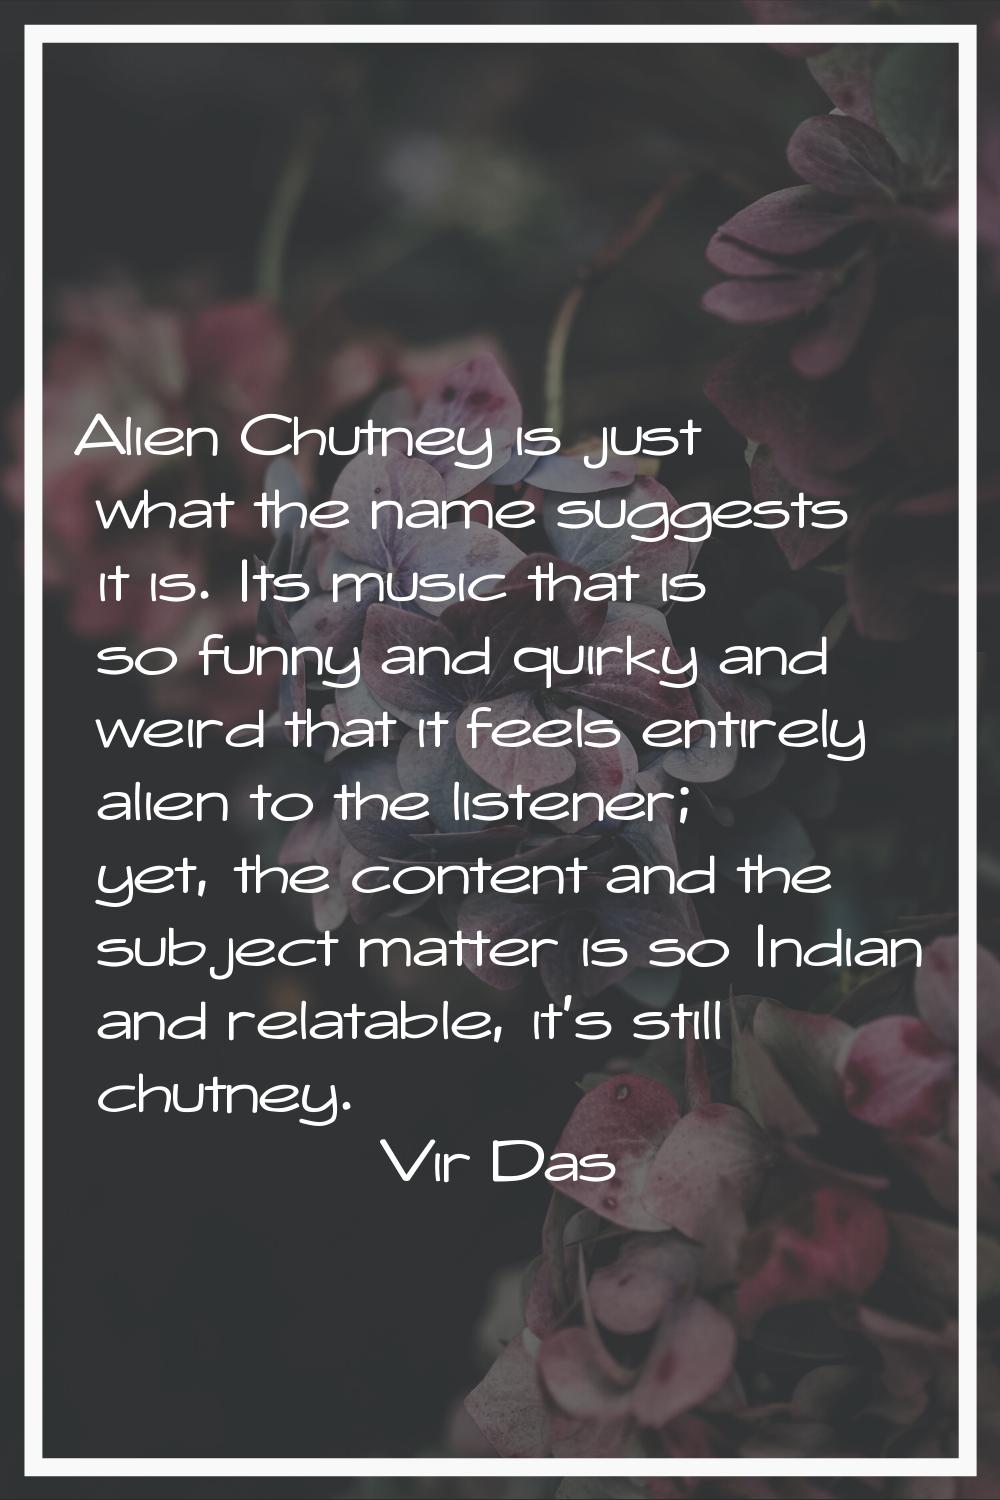 Alien Chutney is just what the name suggests it is. Its music that is so funny and quirky and weird